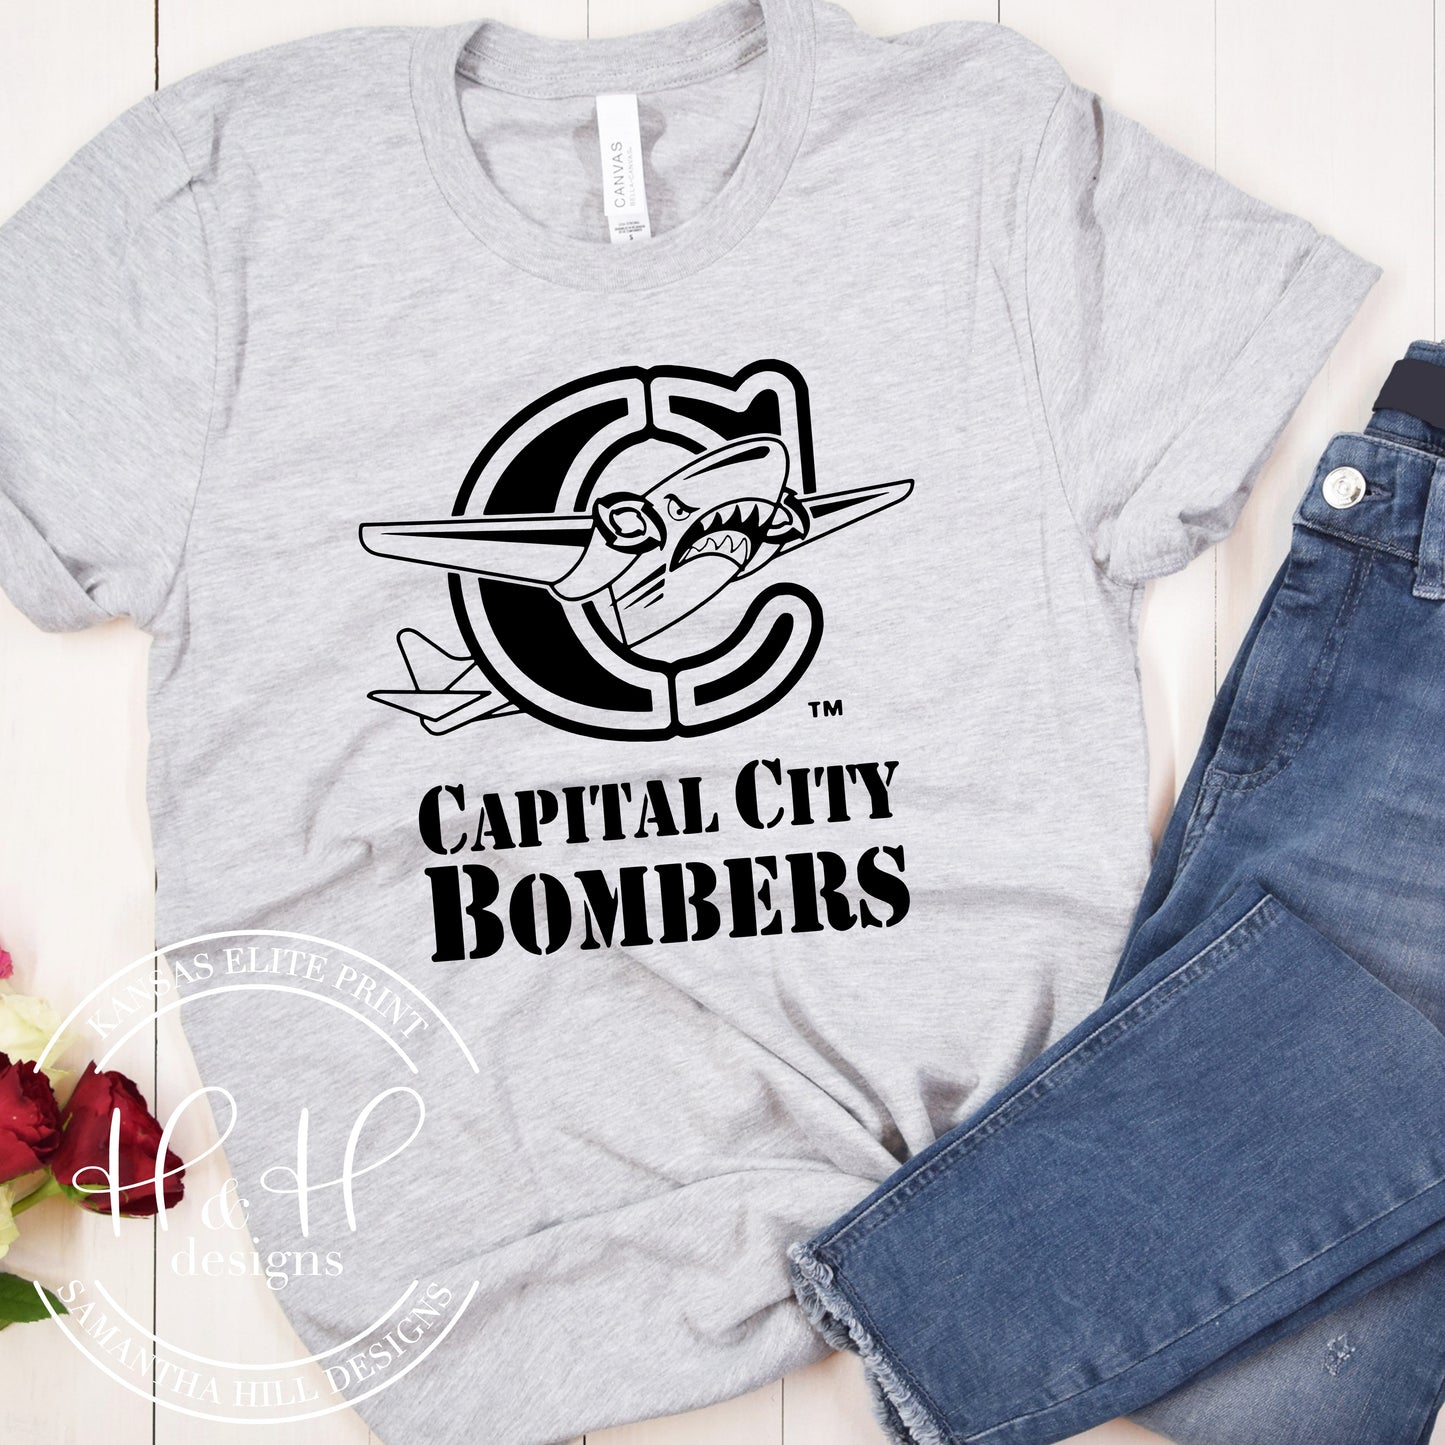 Copy of Capital City Bombers Official Logo